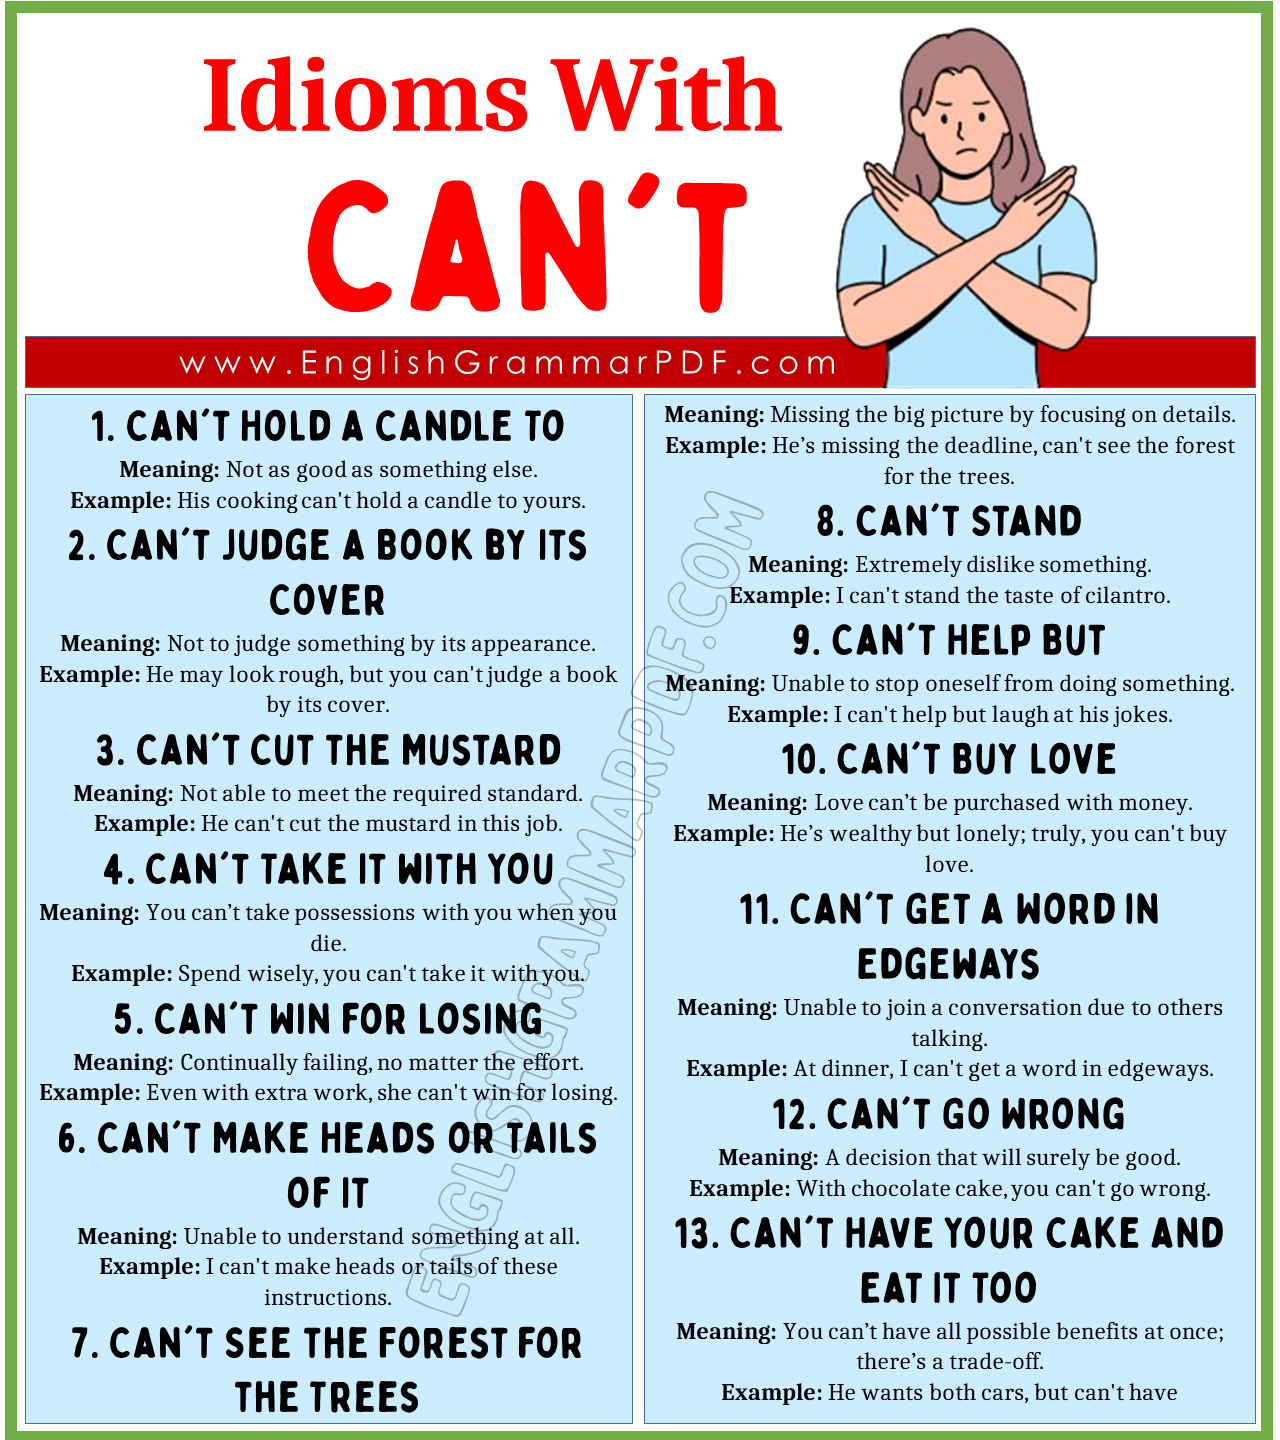 Idioms with Can't